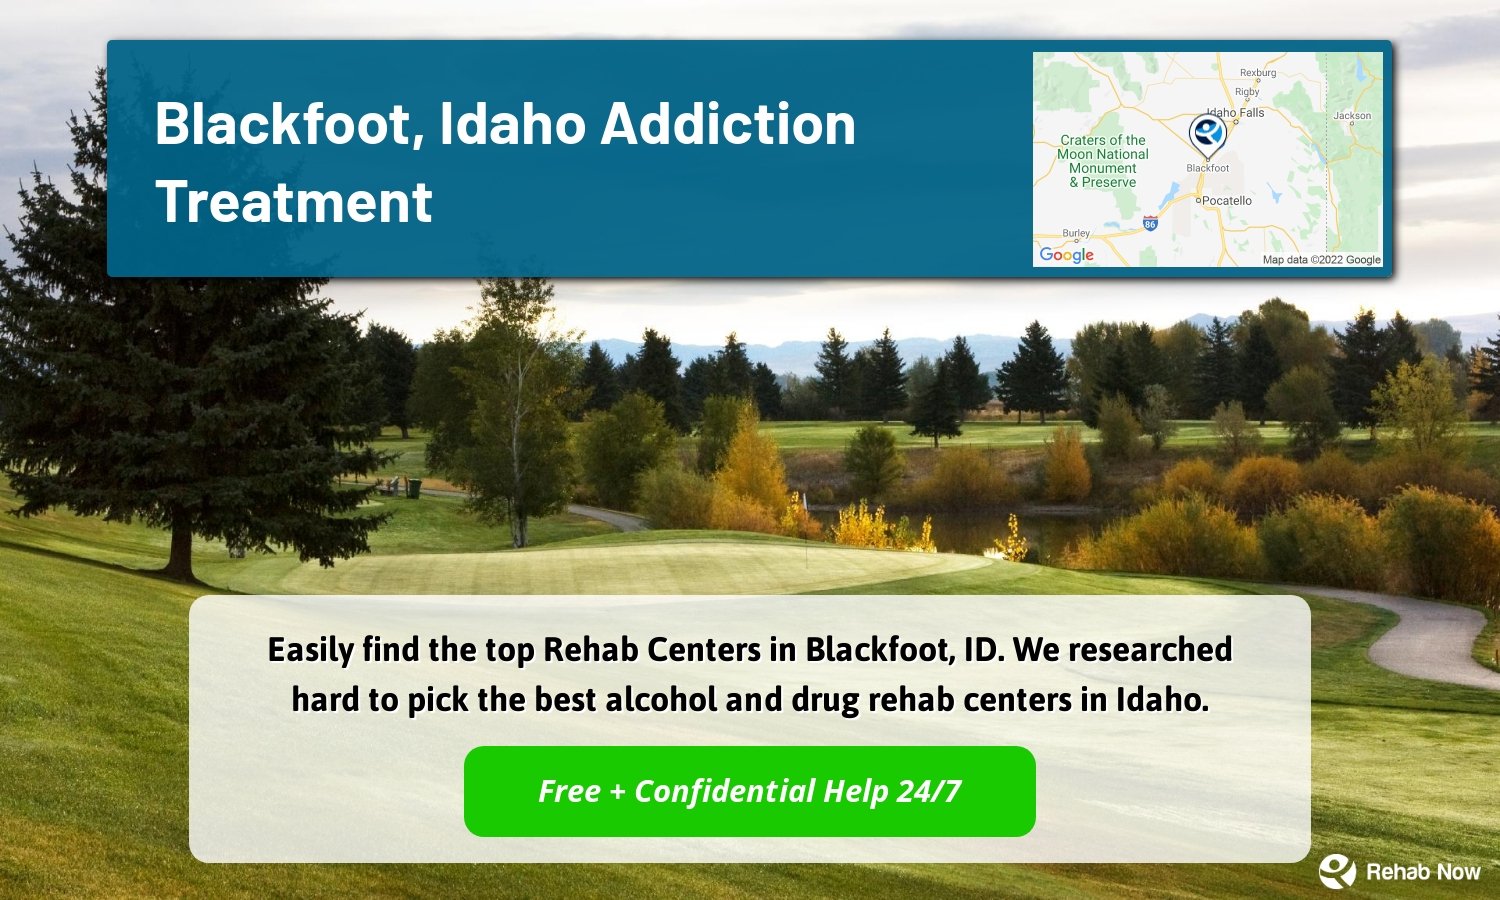 Easily find the top Rehab Centers in Blackfoot, ID. We researched hard to pick the best alcohol and drug rehab centers in Idaho.